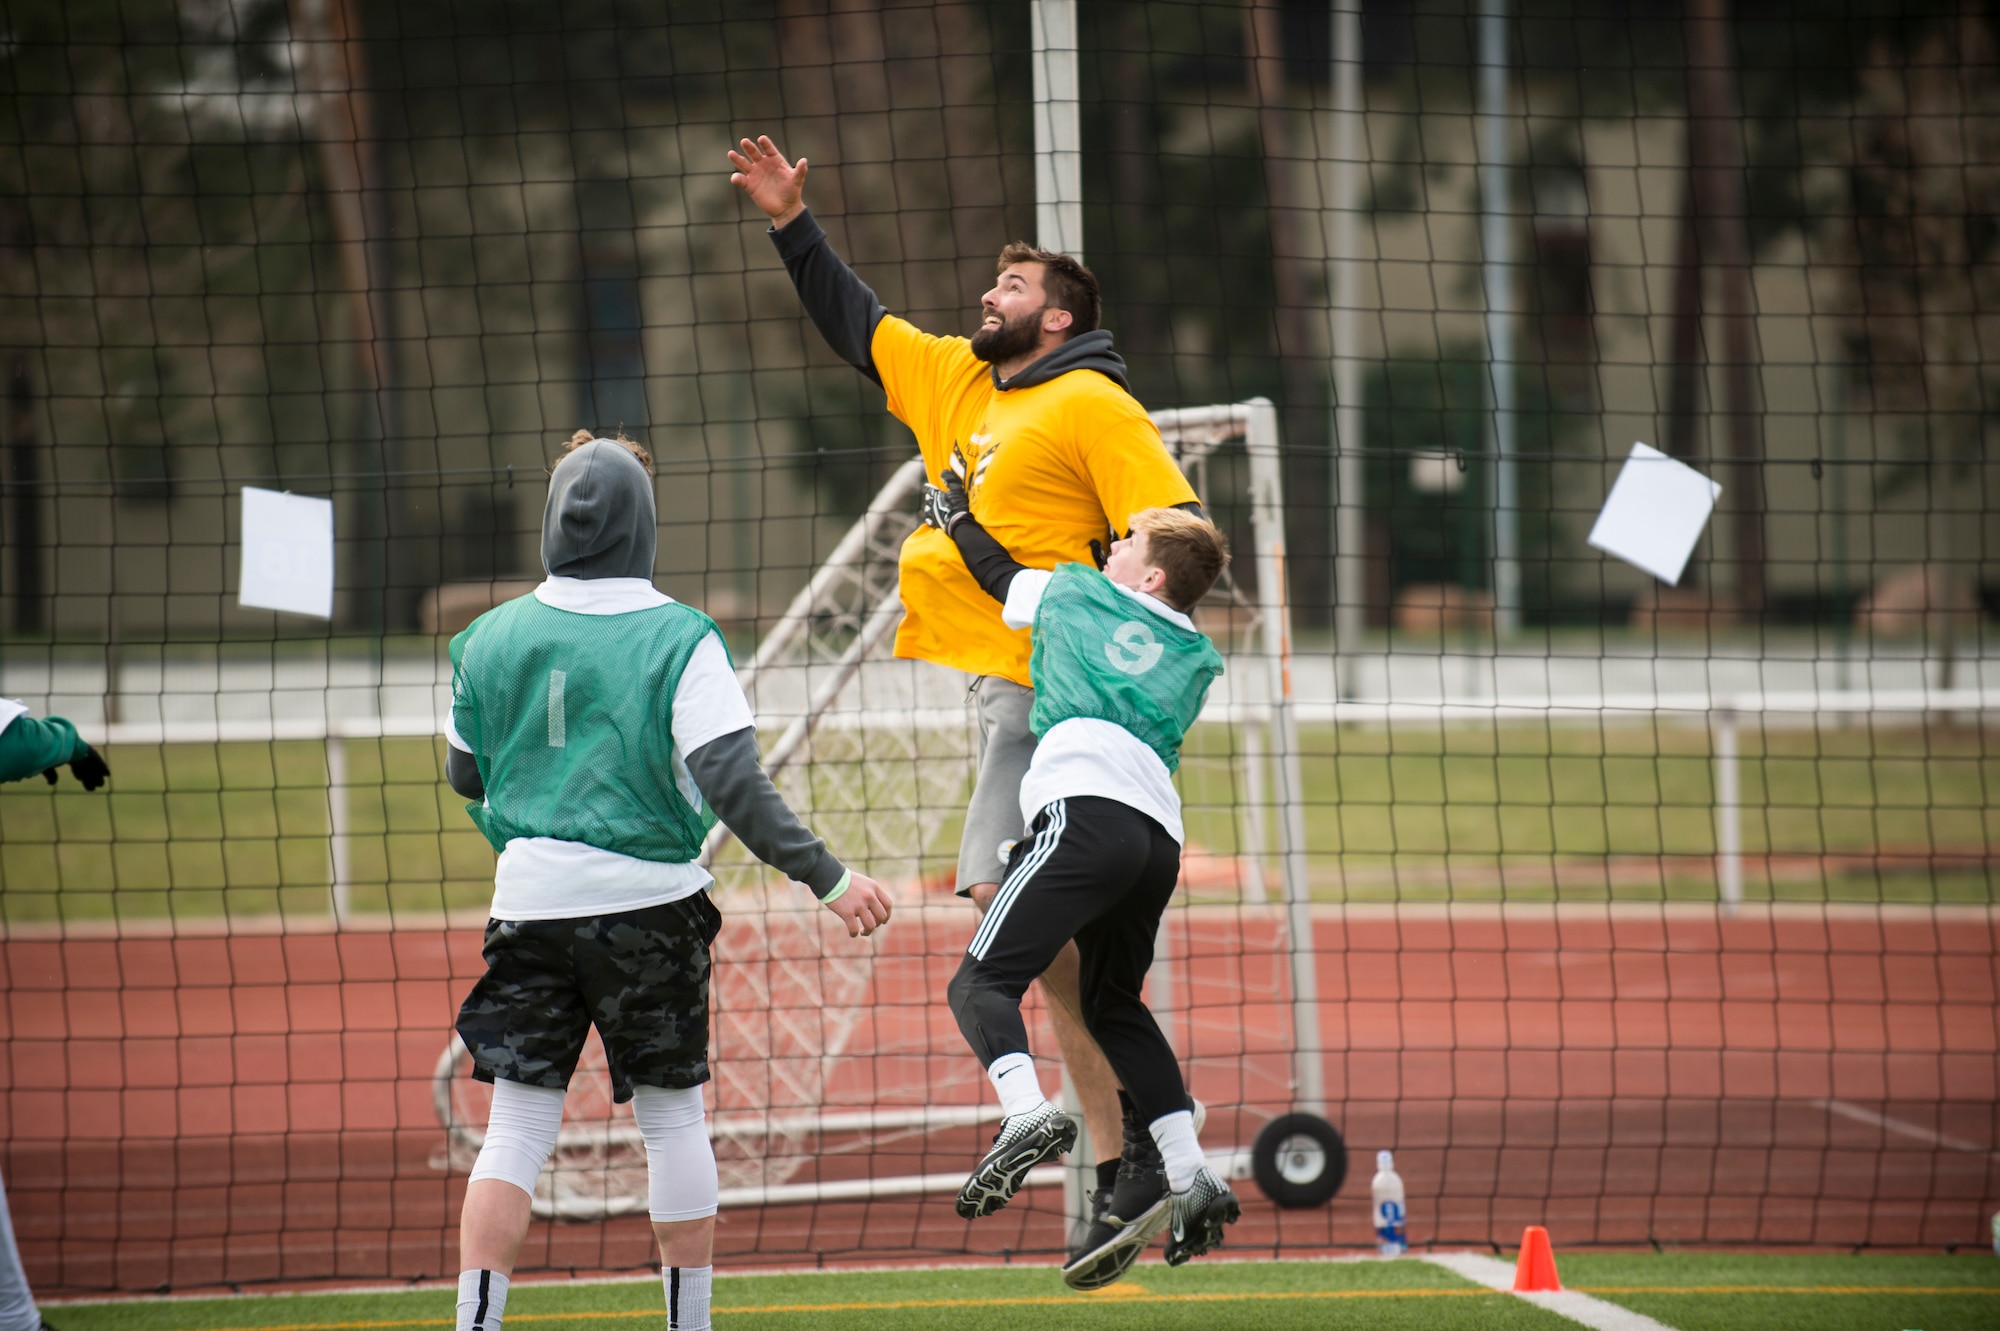 Alejandro Villanueva, Pittsburgh Steelers offensive lineman, jumps to catch a pass during a seven-on-seven football game during his youth football camp at Kaiserslautern High School on Vogelweh Military Complex, Germany, April 13, 2019. Villanueva, a former U.S. Army captain and Army Ranger, returned to Europe to host his first overseas football camp. (U.S. Air Force photo by Staff Sgt. Jonathan Bass)